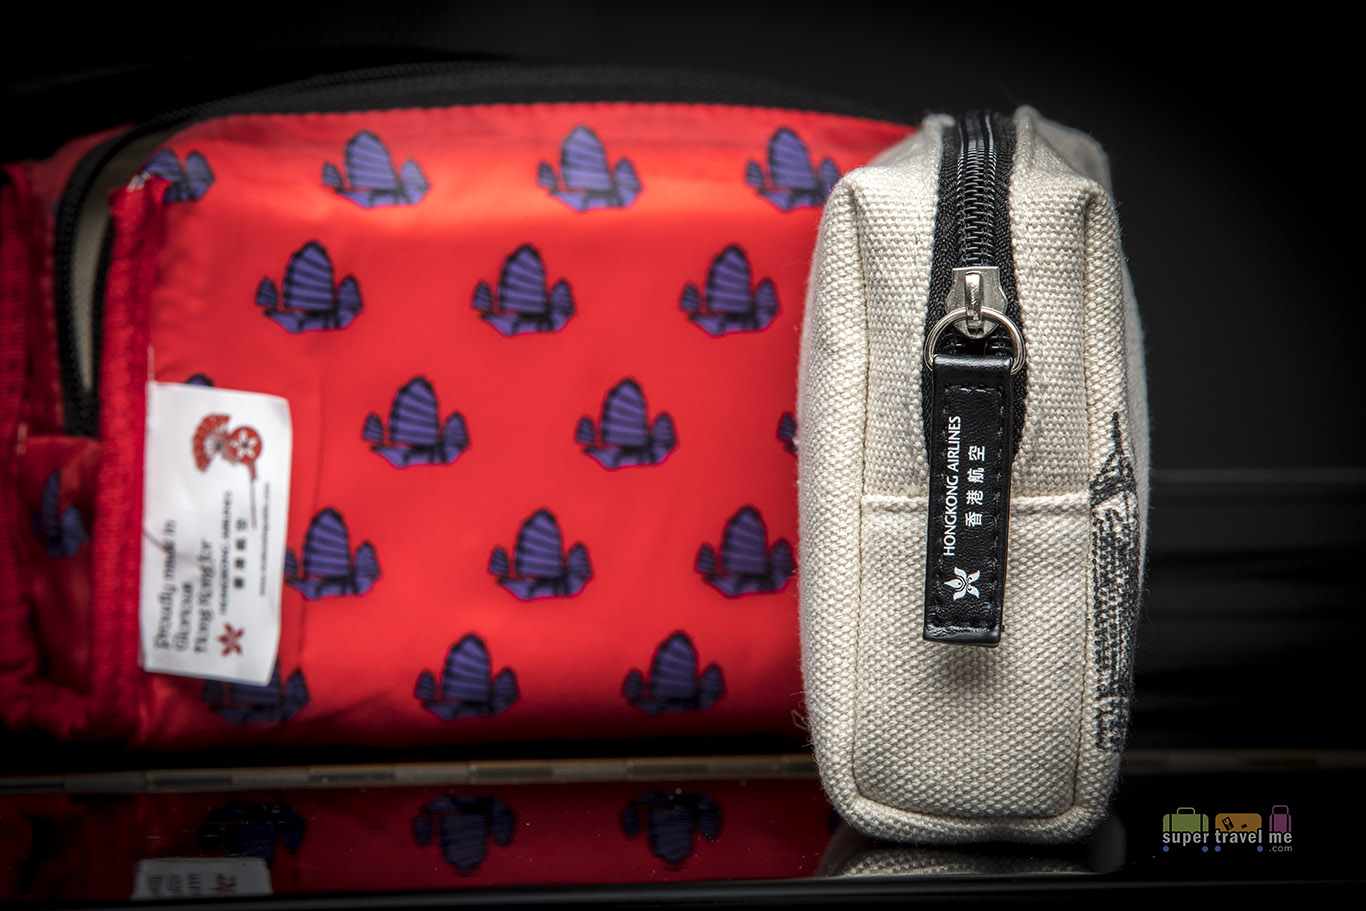 The Hong Kong Airlines amenity kit pouch and its interior lining